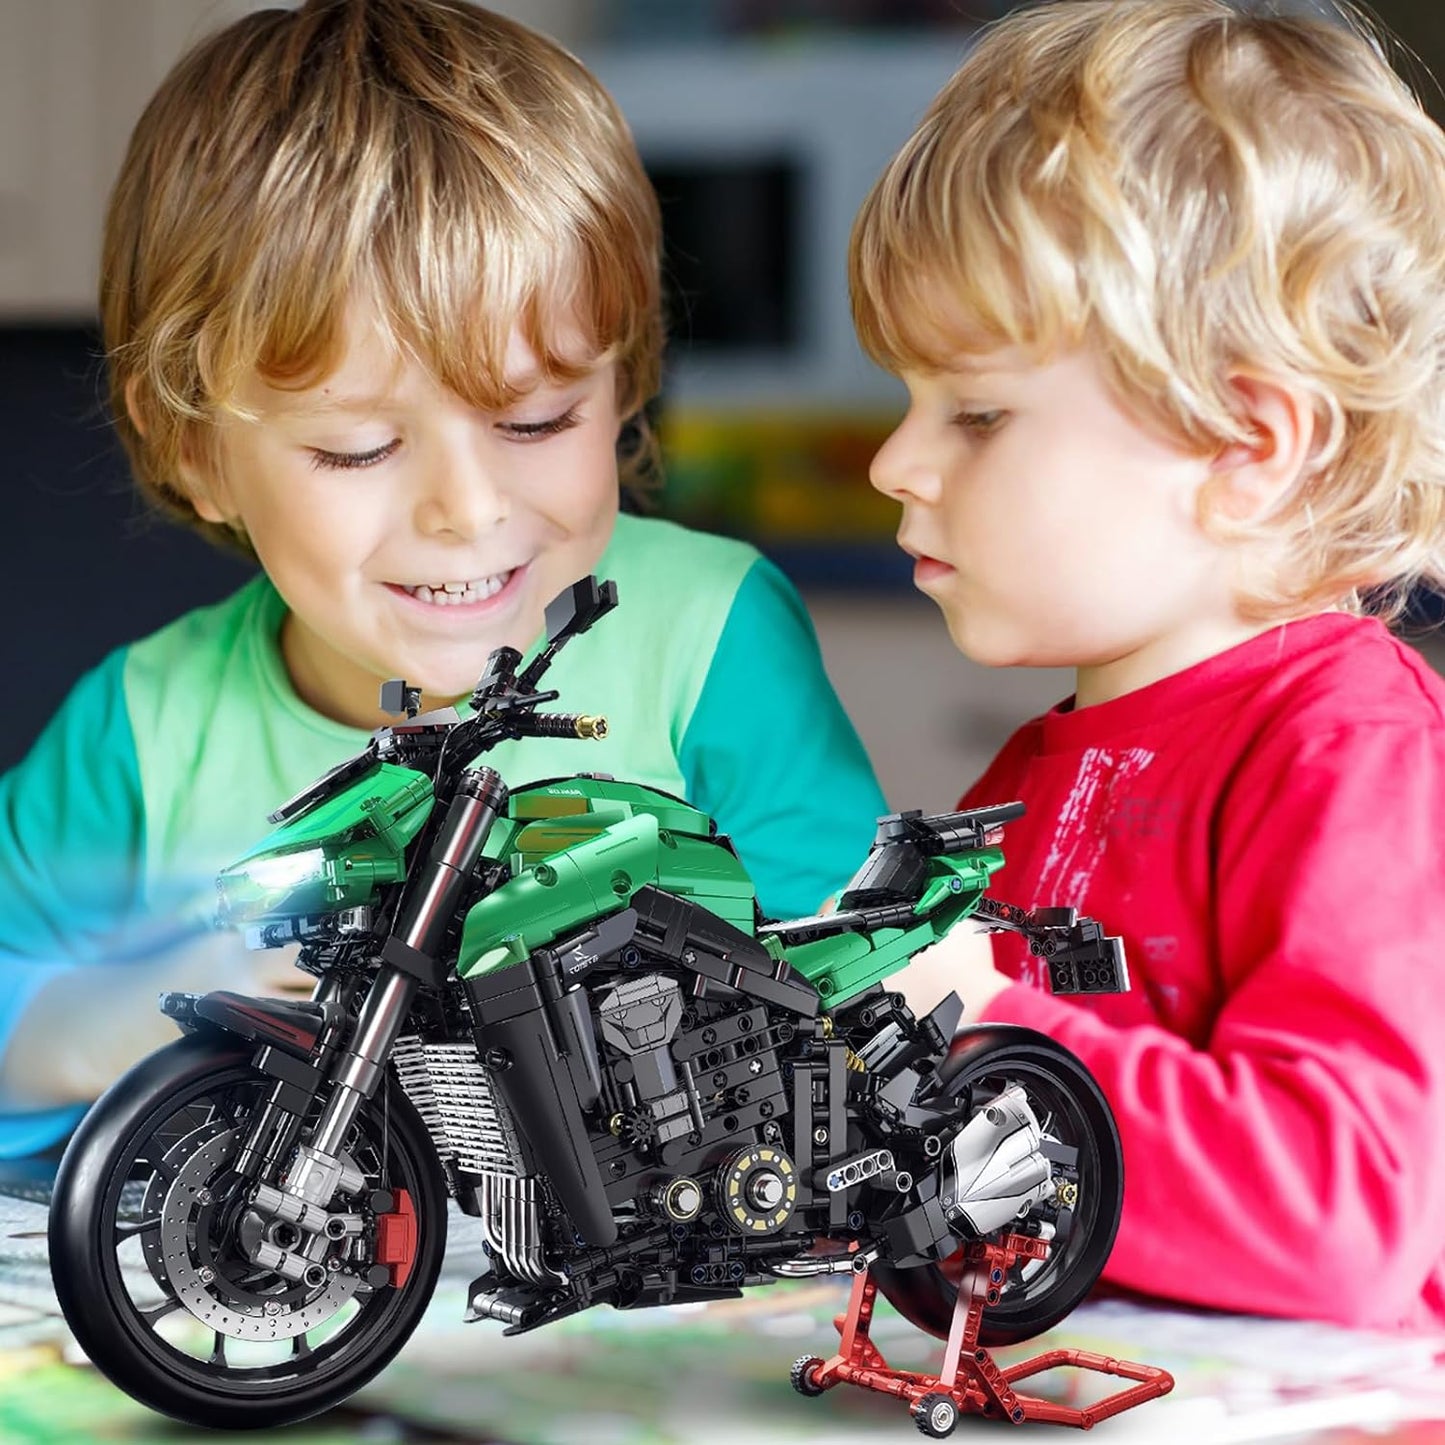 1:5 Motorcycle Model Building Bricks Sets - 2090+ PCS Large Motorcycle Building Blocks Kit with Light - Display Model Toy Gift Idea for Adults Boys